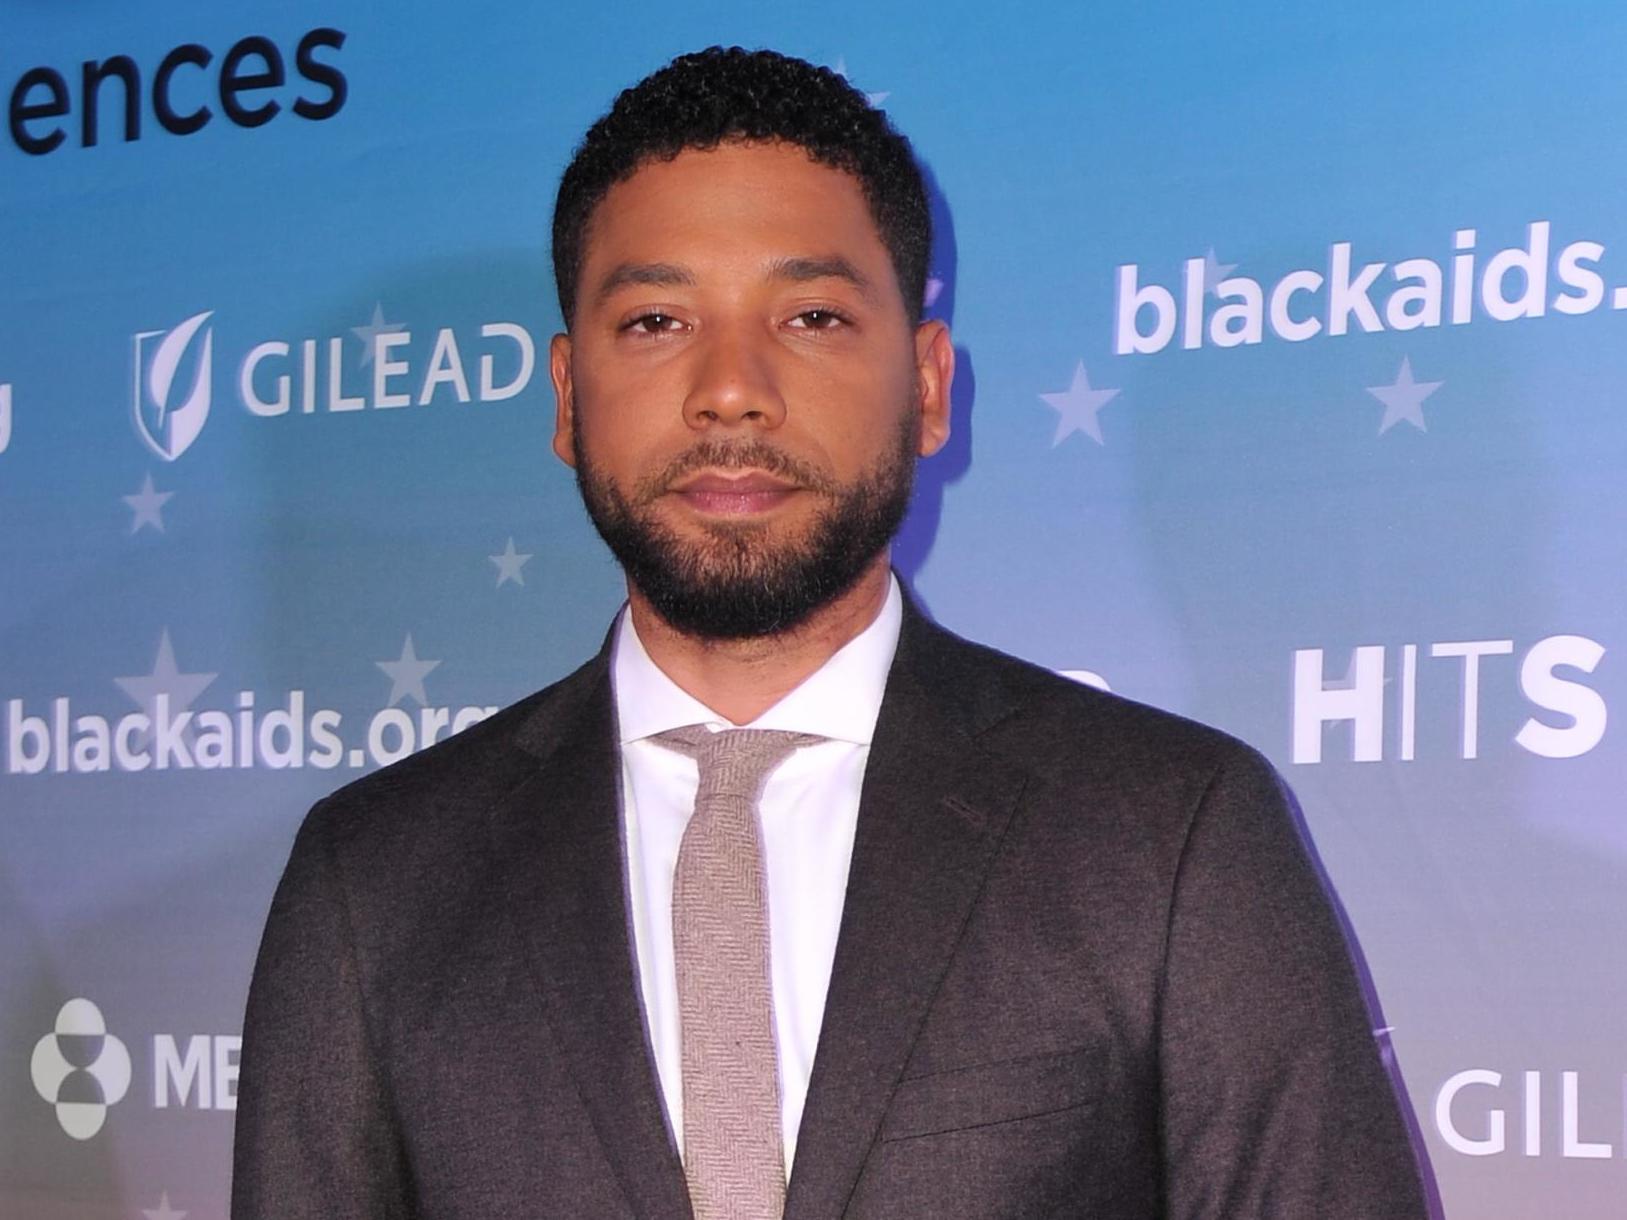 Jussie Smollett attending the Black AIDS Institute's 2018 Heroes in The Struggle Gala